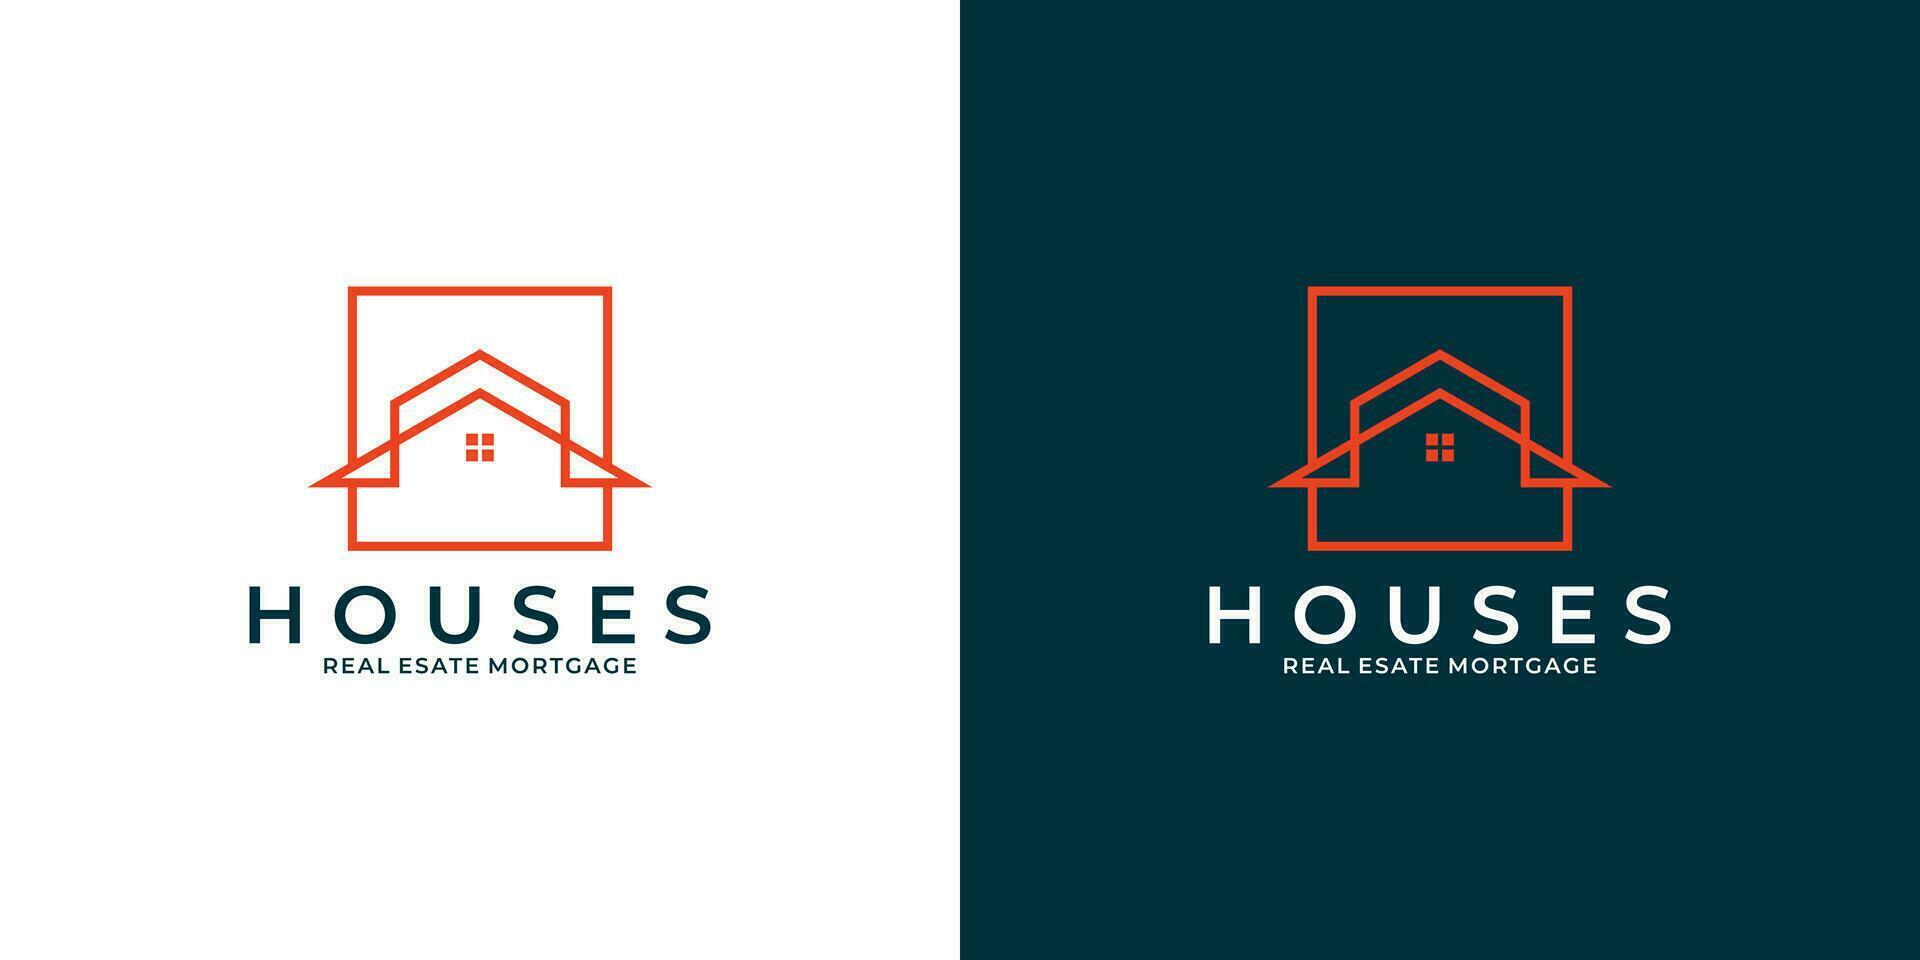 buildings real estate mortgage house logo design for your business vector